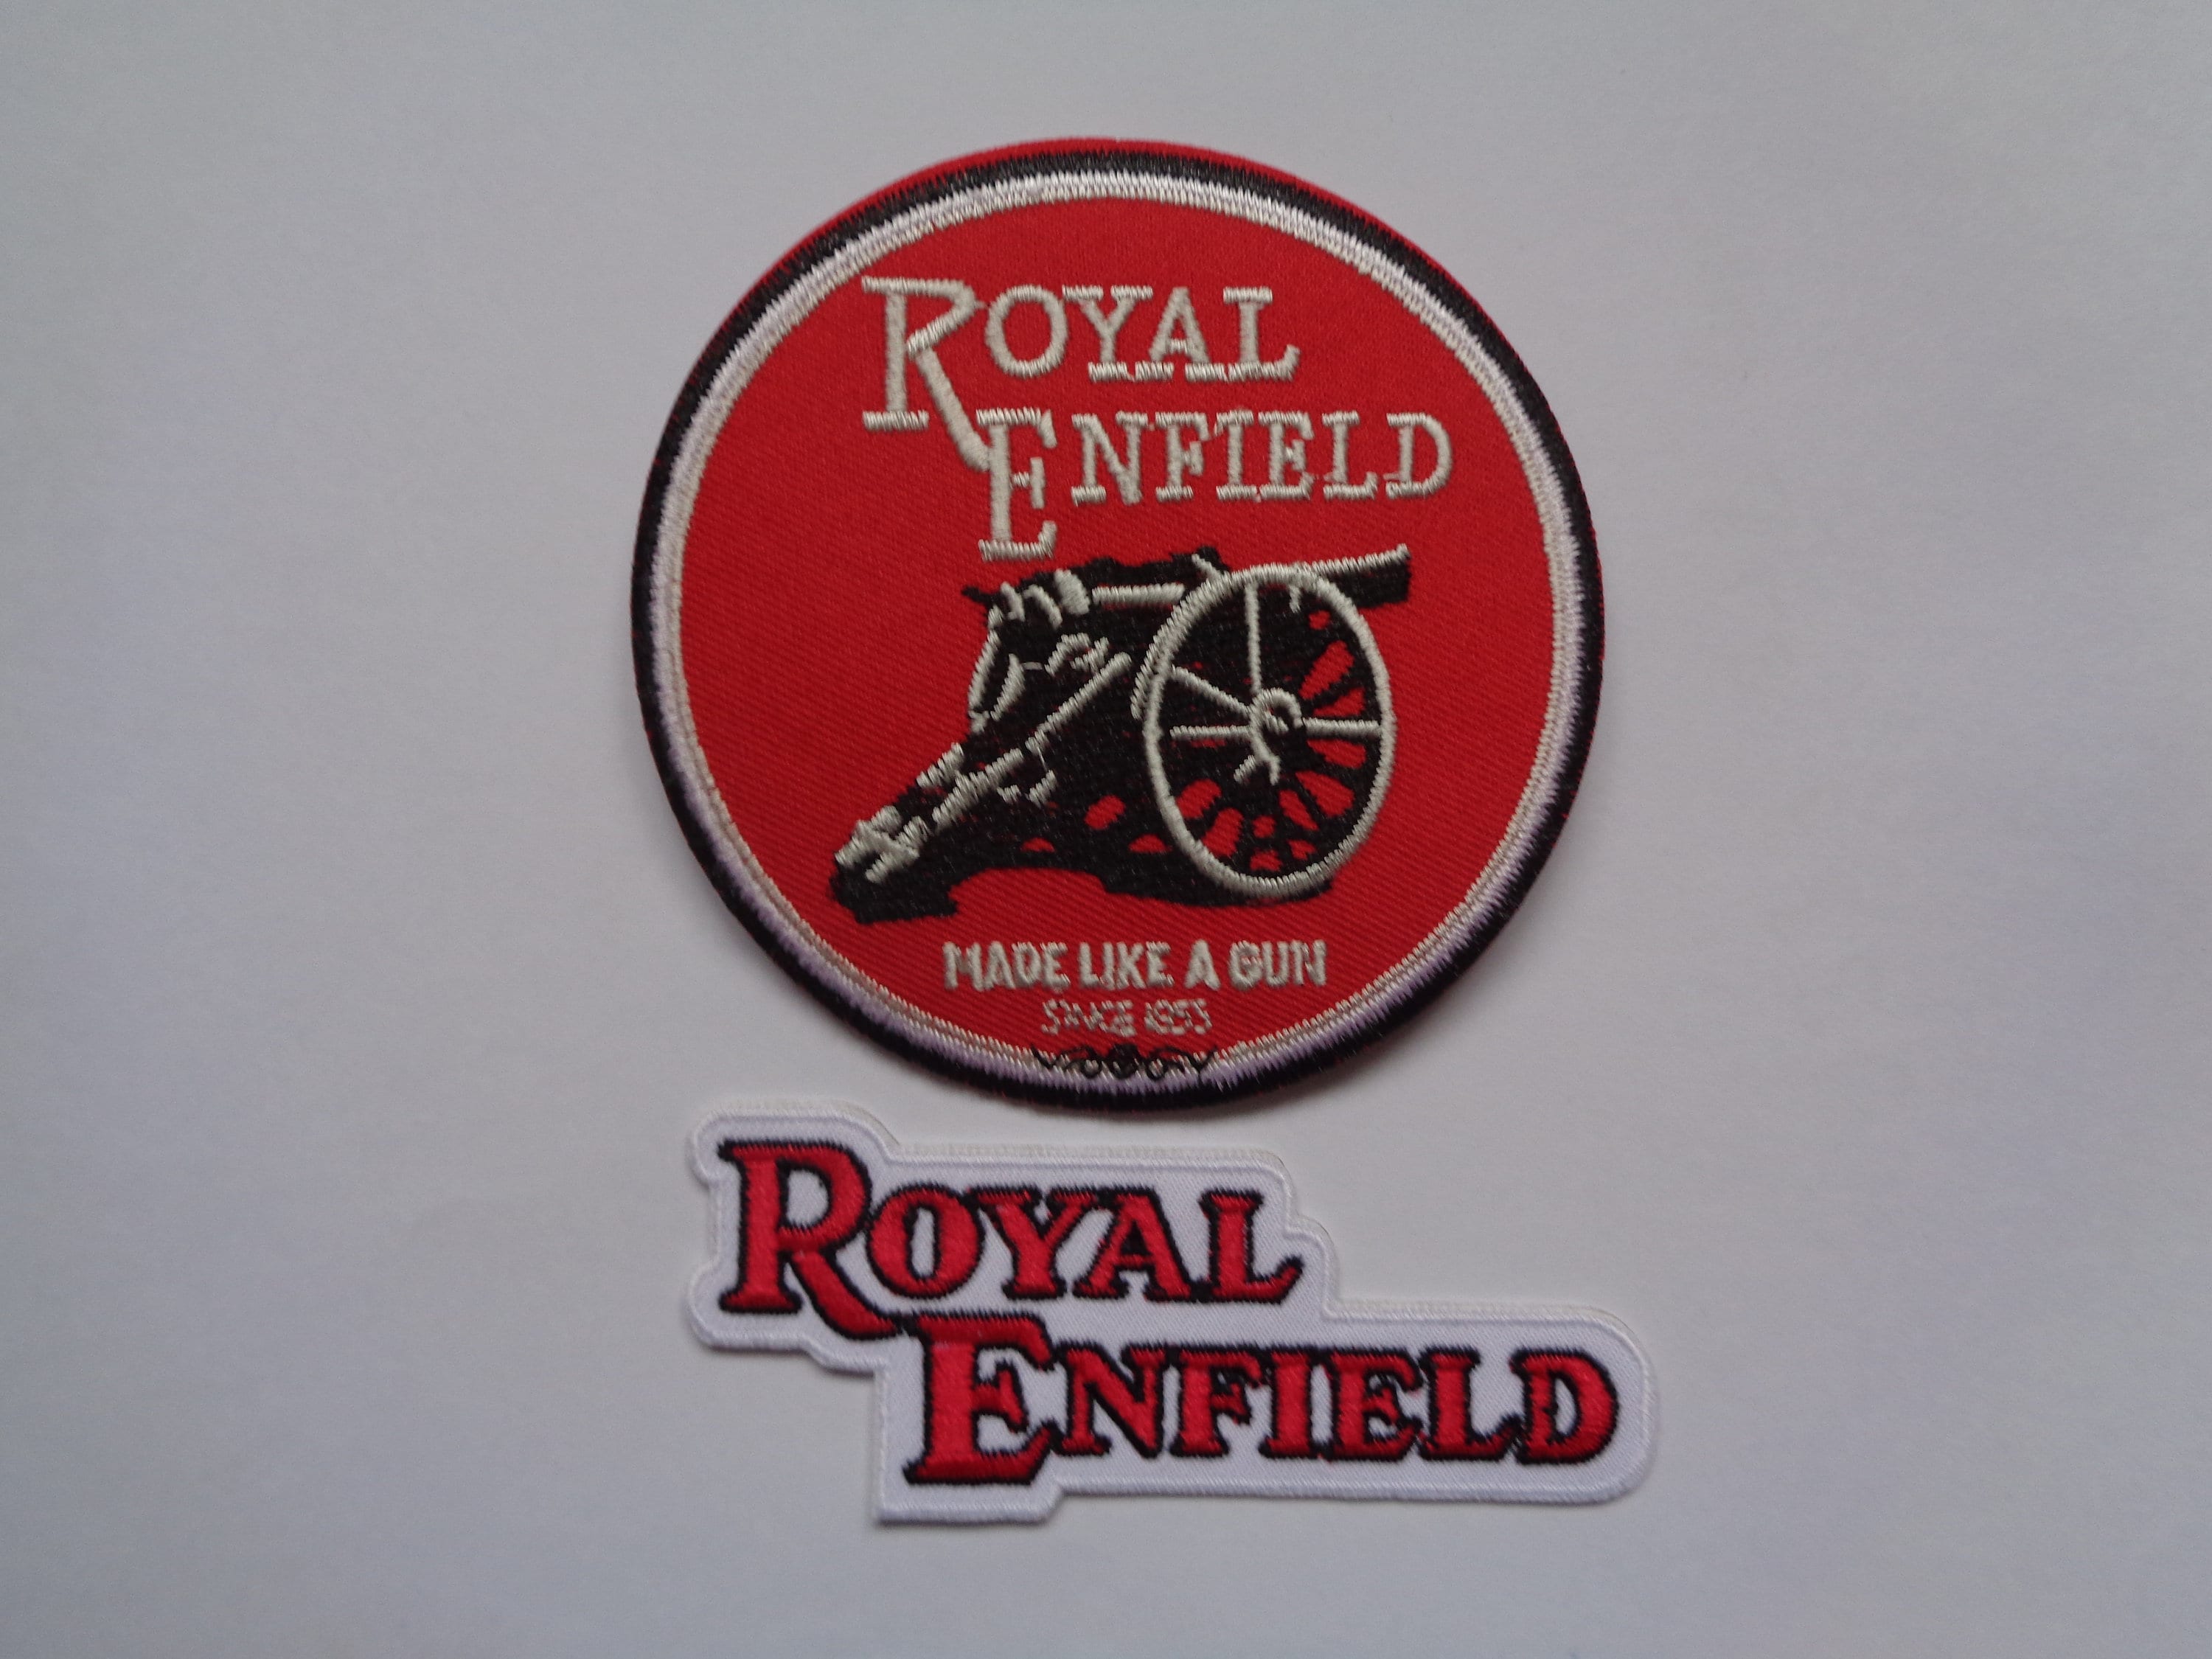 ROYAL ENFIELD SPORTS RACING MOTORCYCLE BIKER CAP EMBROIDERED LOGO Patch Iron Sew